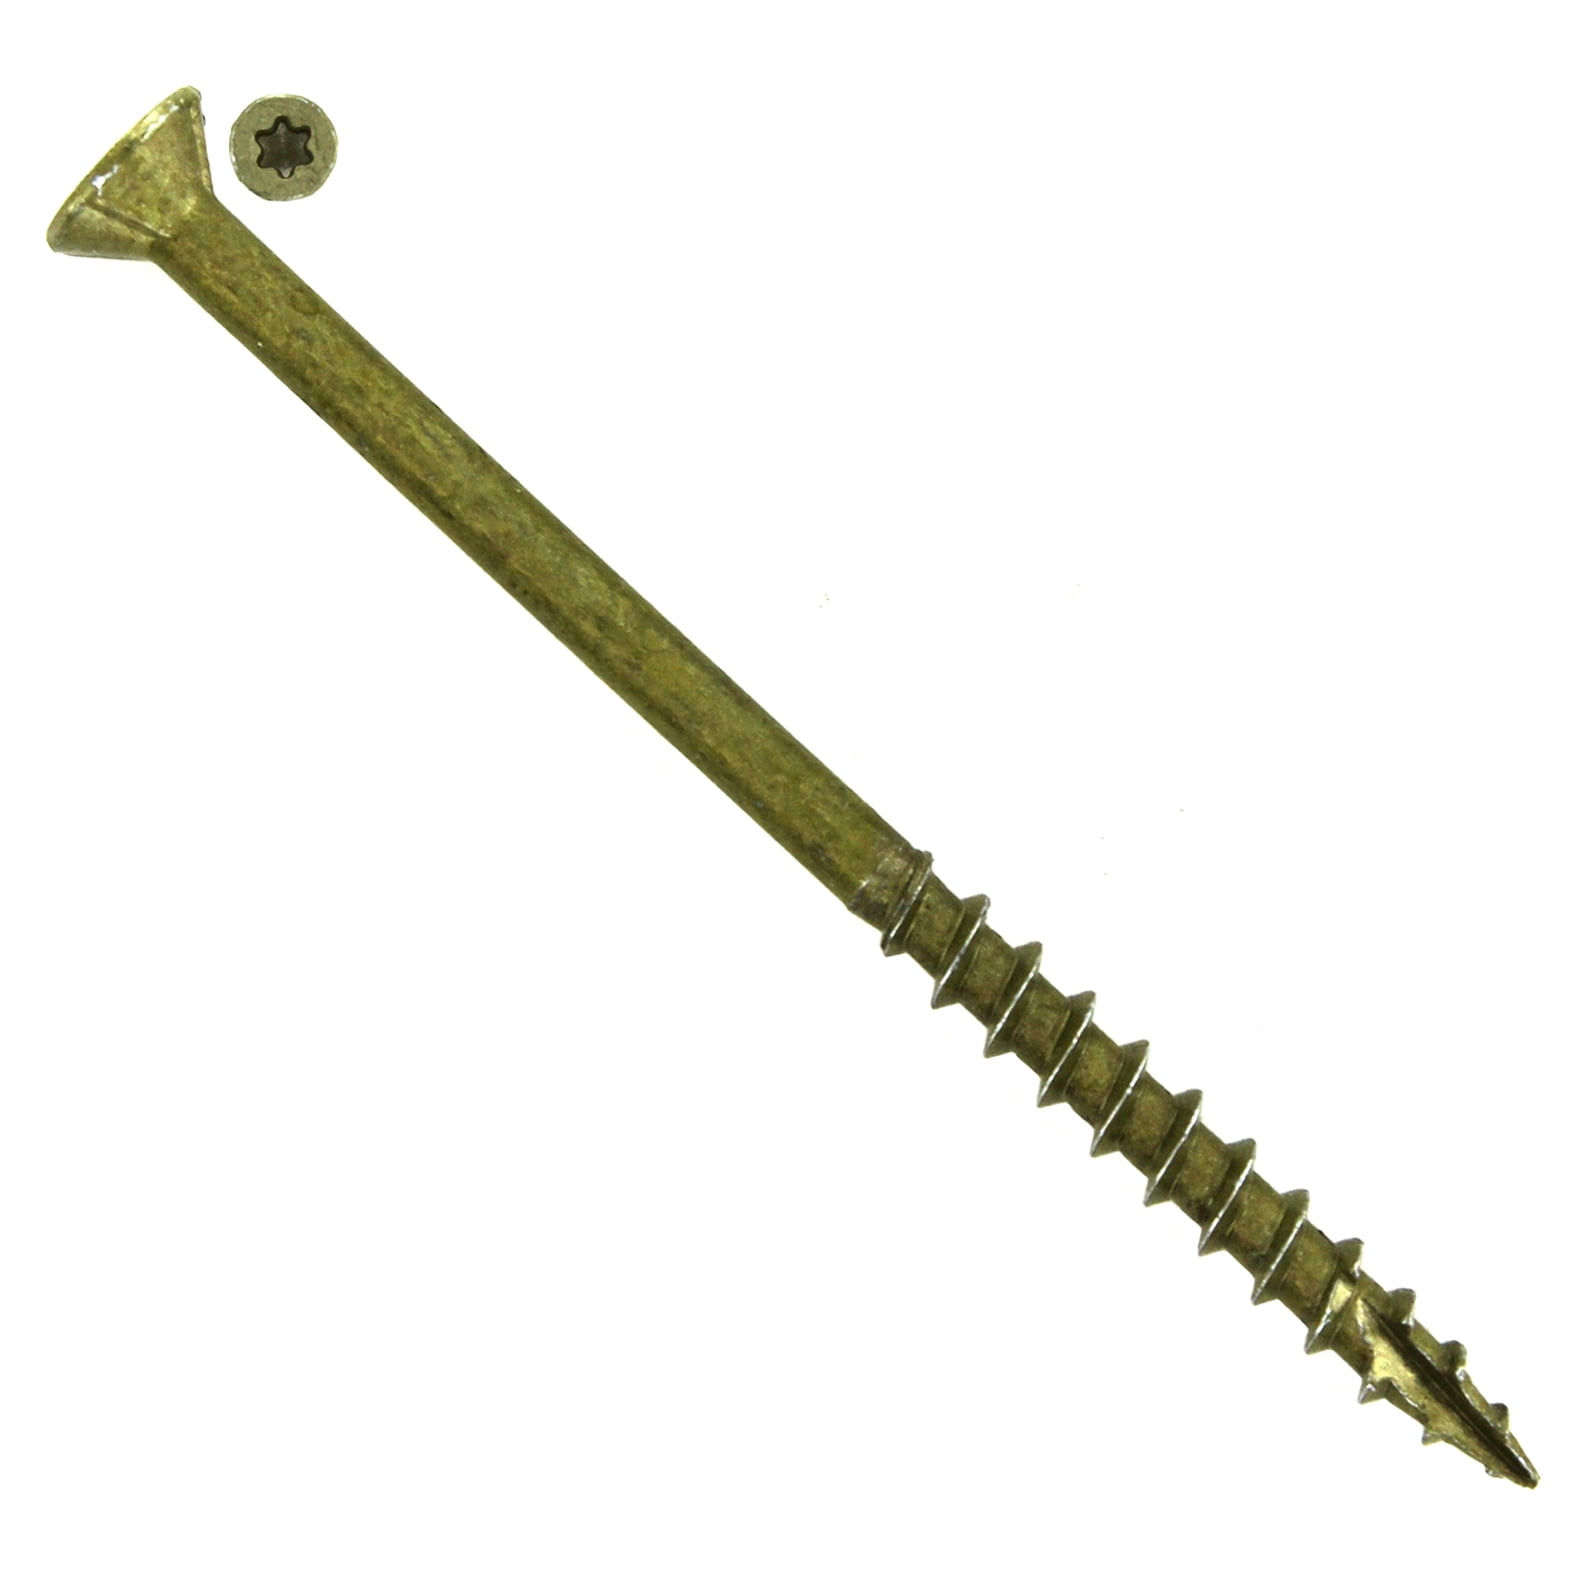 1//4 in-20 X 3 in Grade 18-8 Stainless Steel Flat Head Phillips Pack of 15 Prime-Line 9002106 Machine Screw